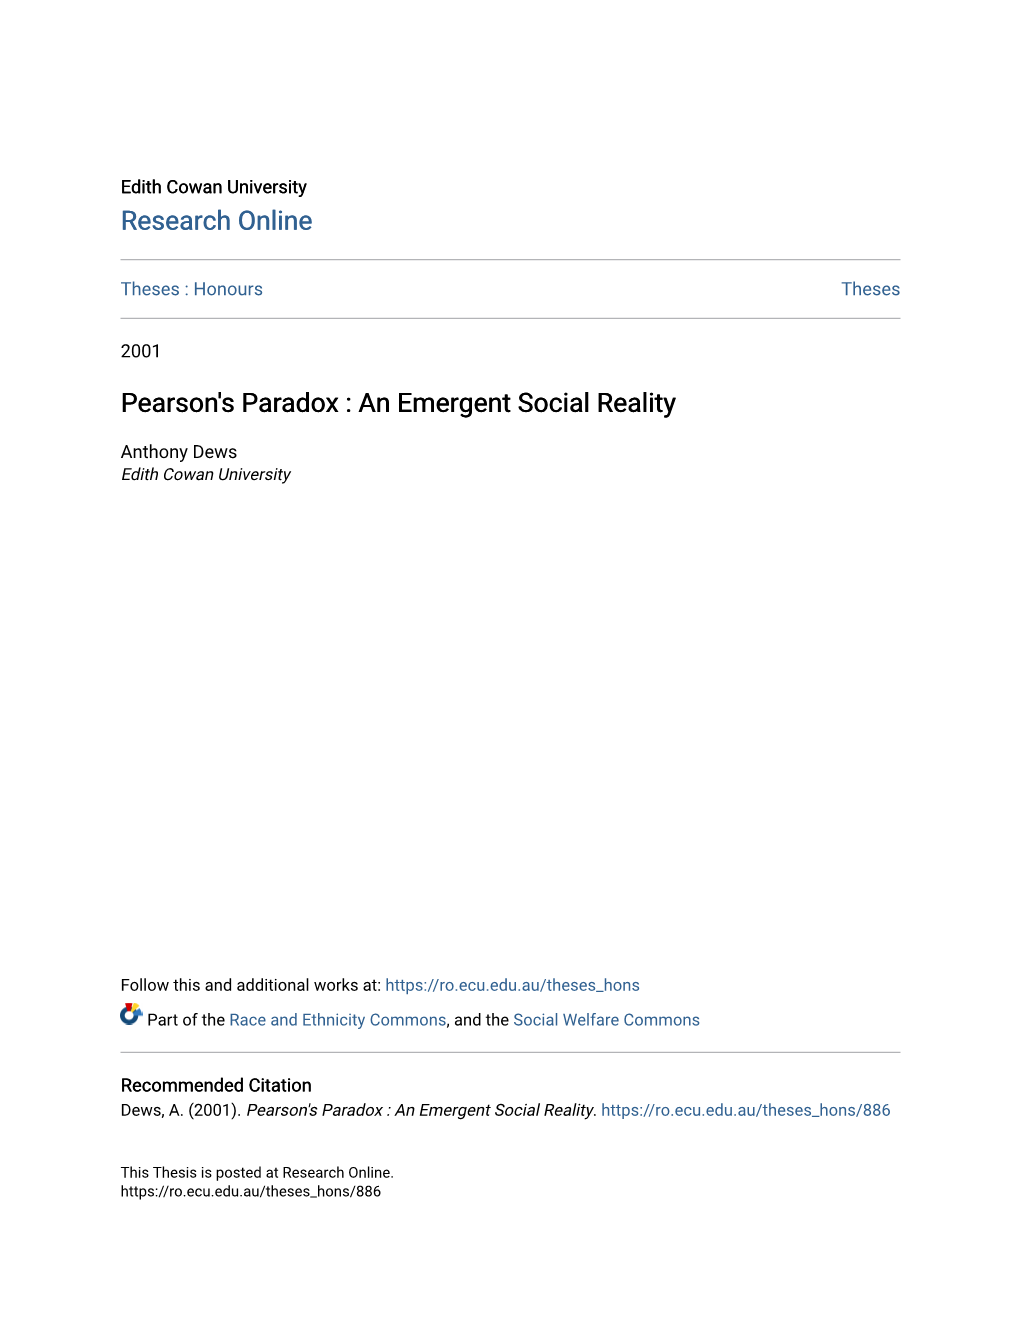 Pearson's Paradox : an Emergent Social Reality